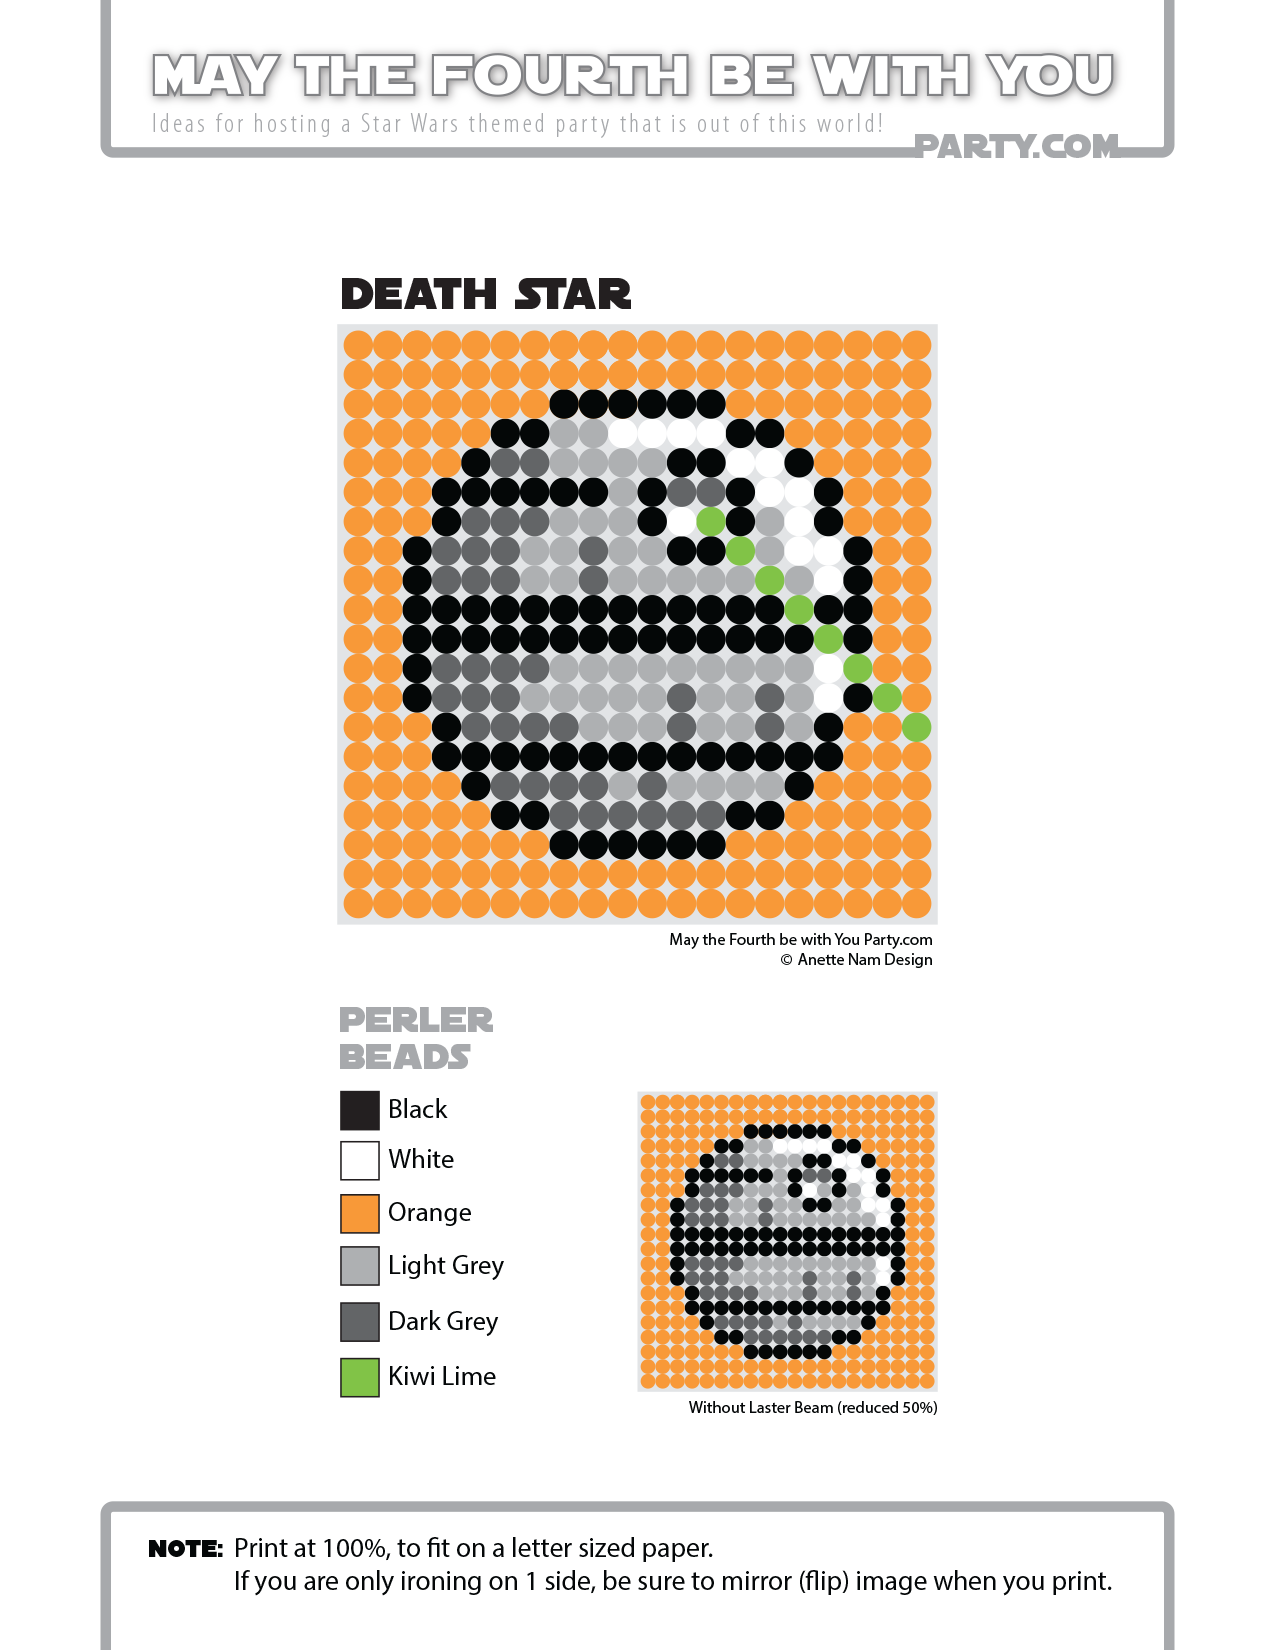 Death Star Perler Bead Coaster  May the Fourth be with You Party